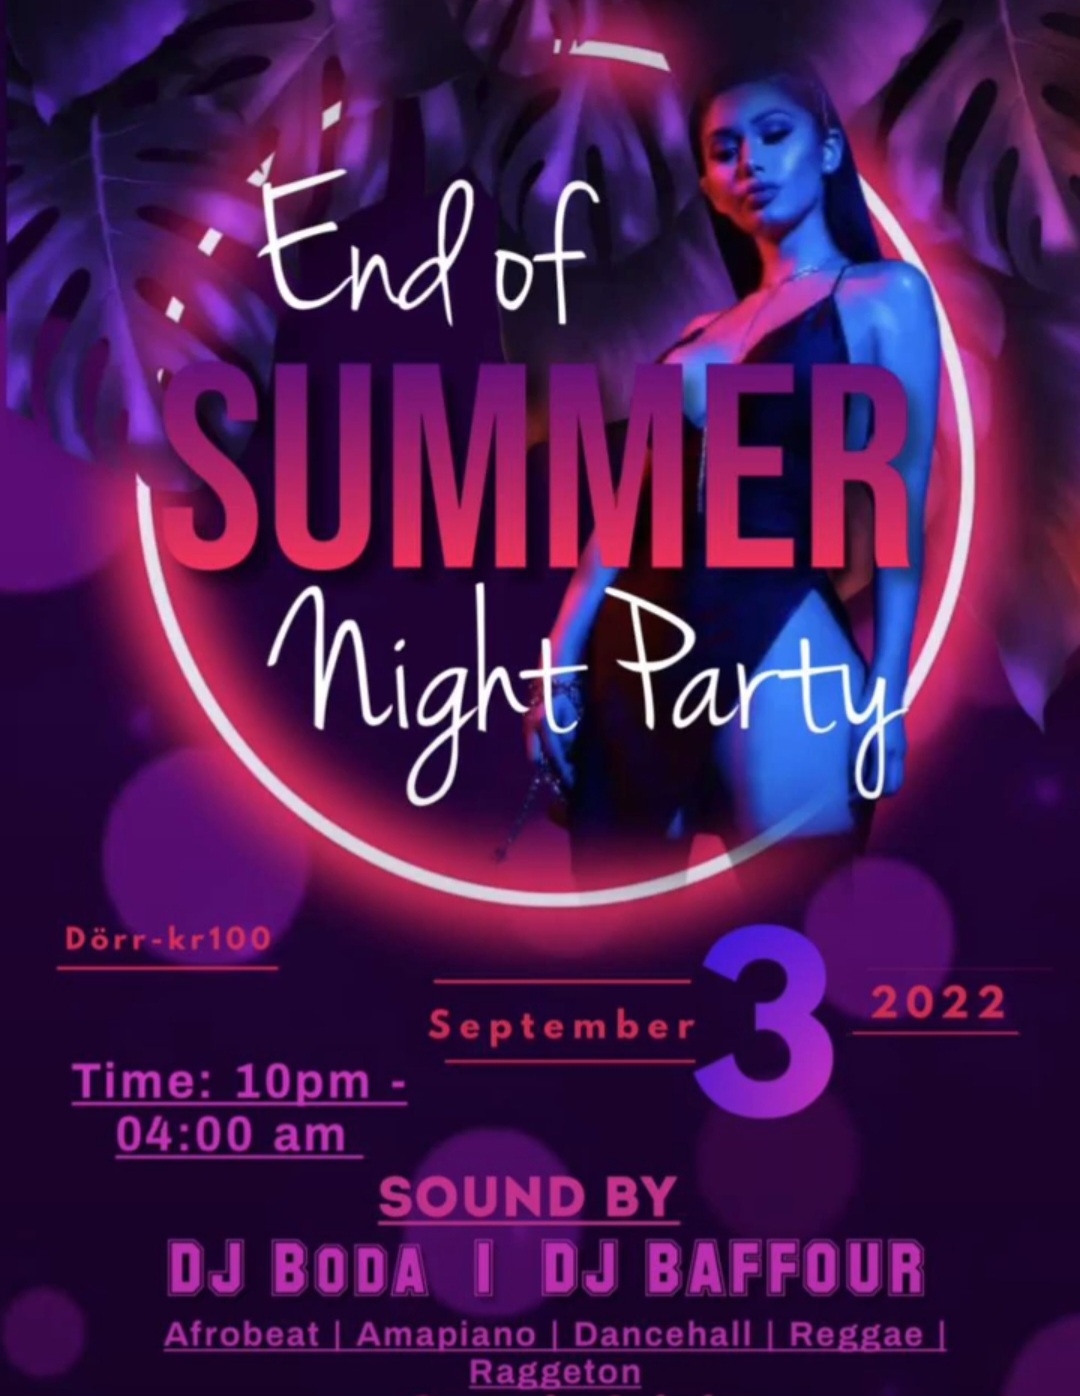 KLUBB! End of summer night party!